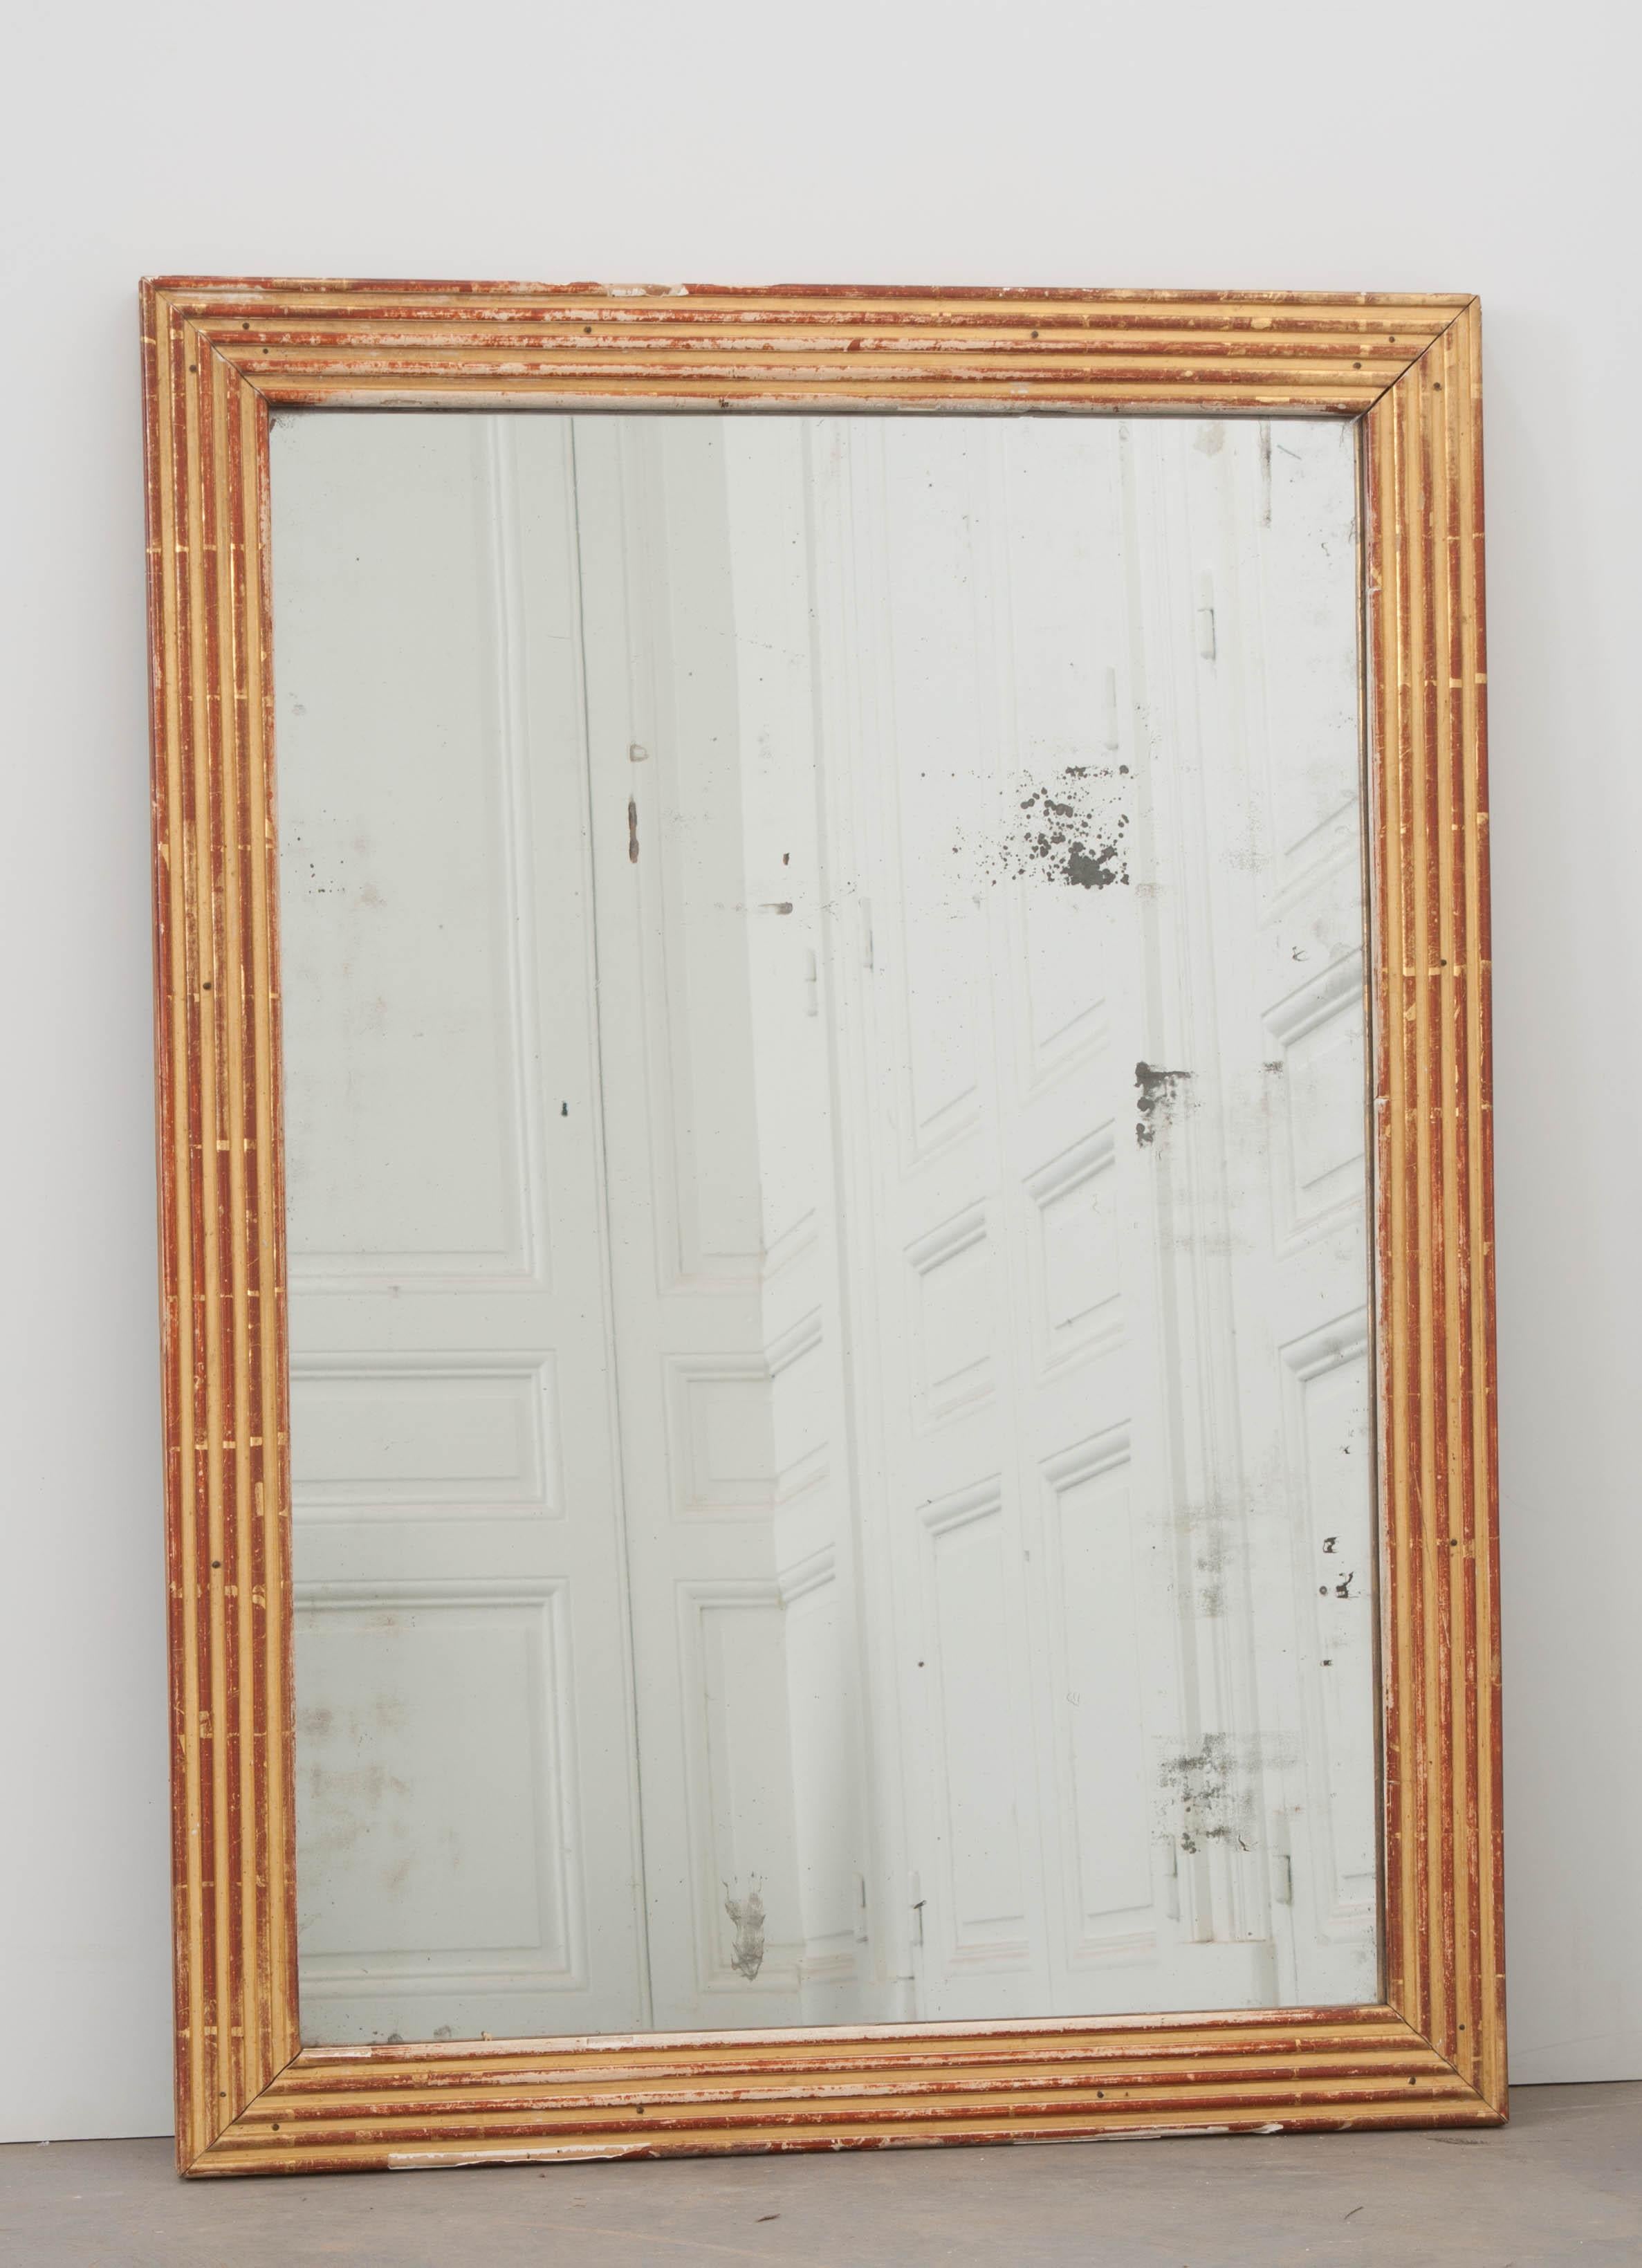 This handsome Louis XVI style reed-carved rectilinear giltwood mirror, circa 1870, was sourced in France and displays the right amount of wear and a rich patina for the 